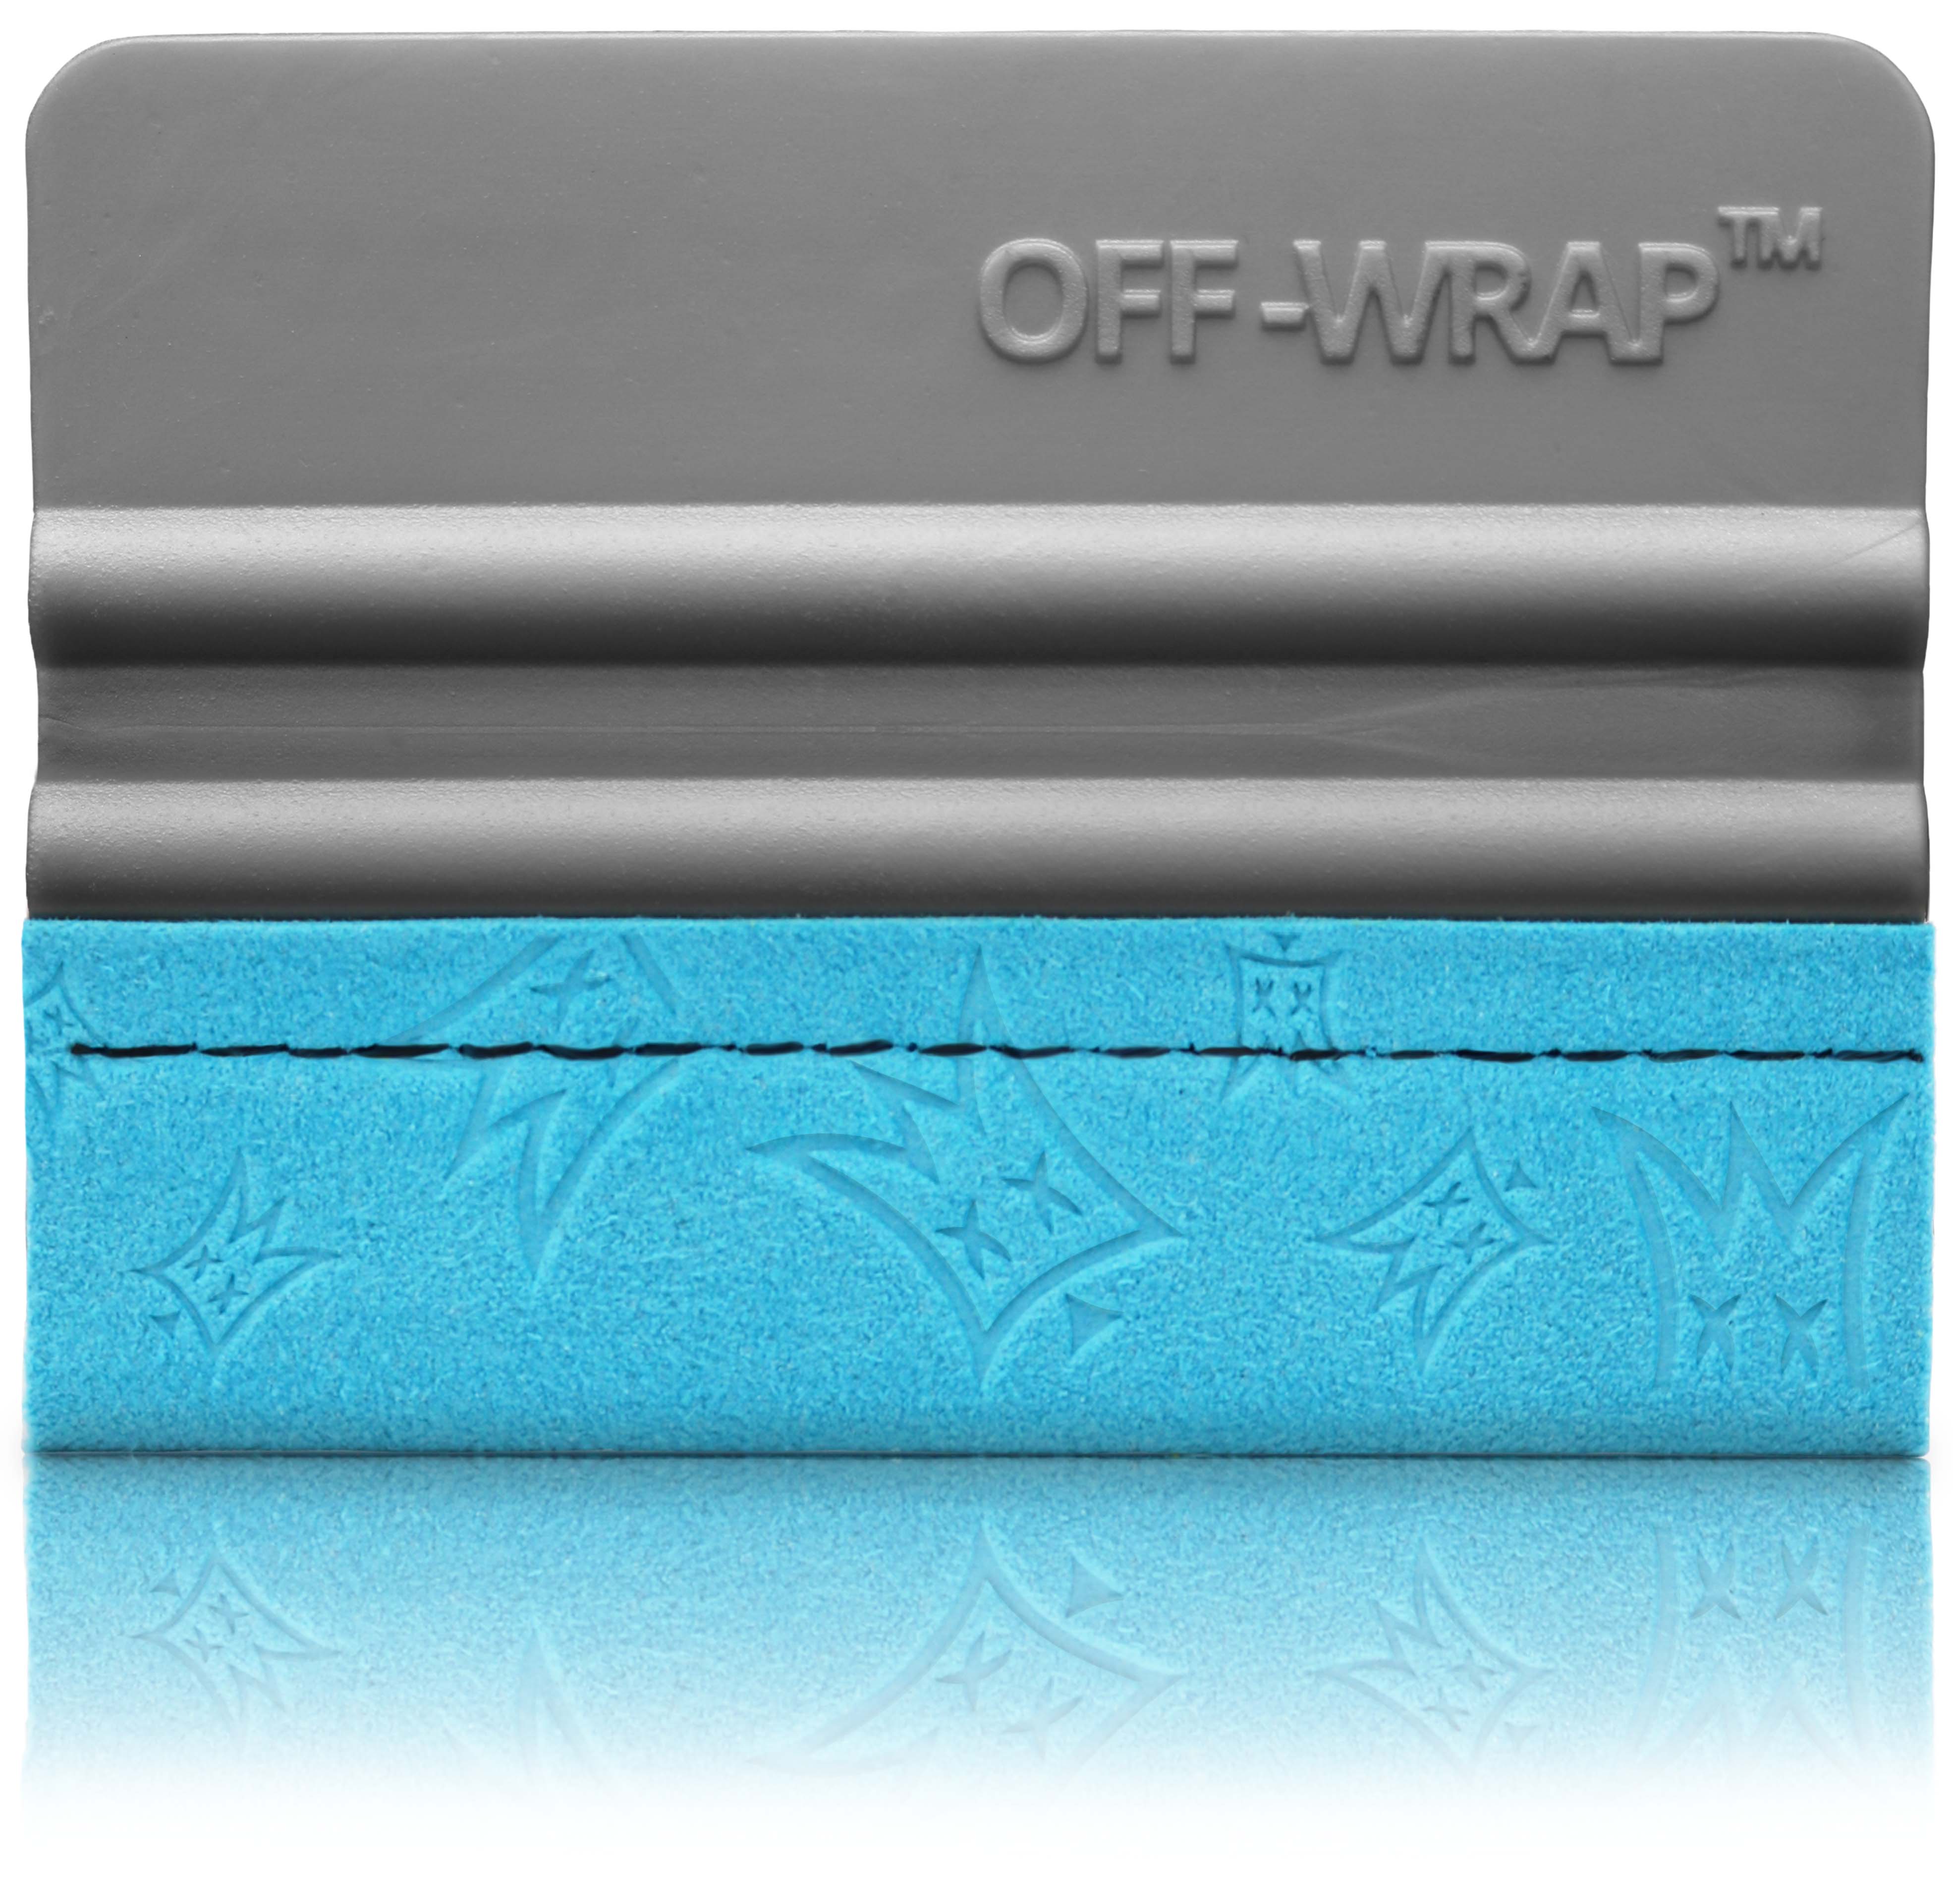 Off-Wrap Squeegee Lube